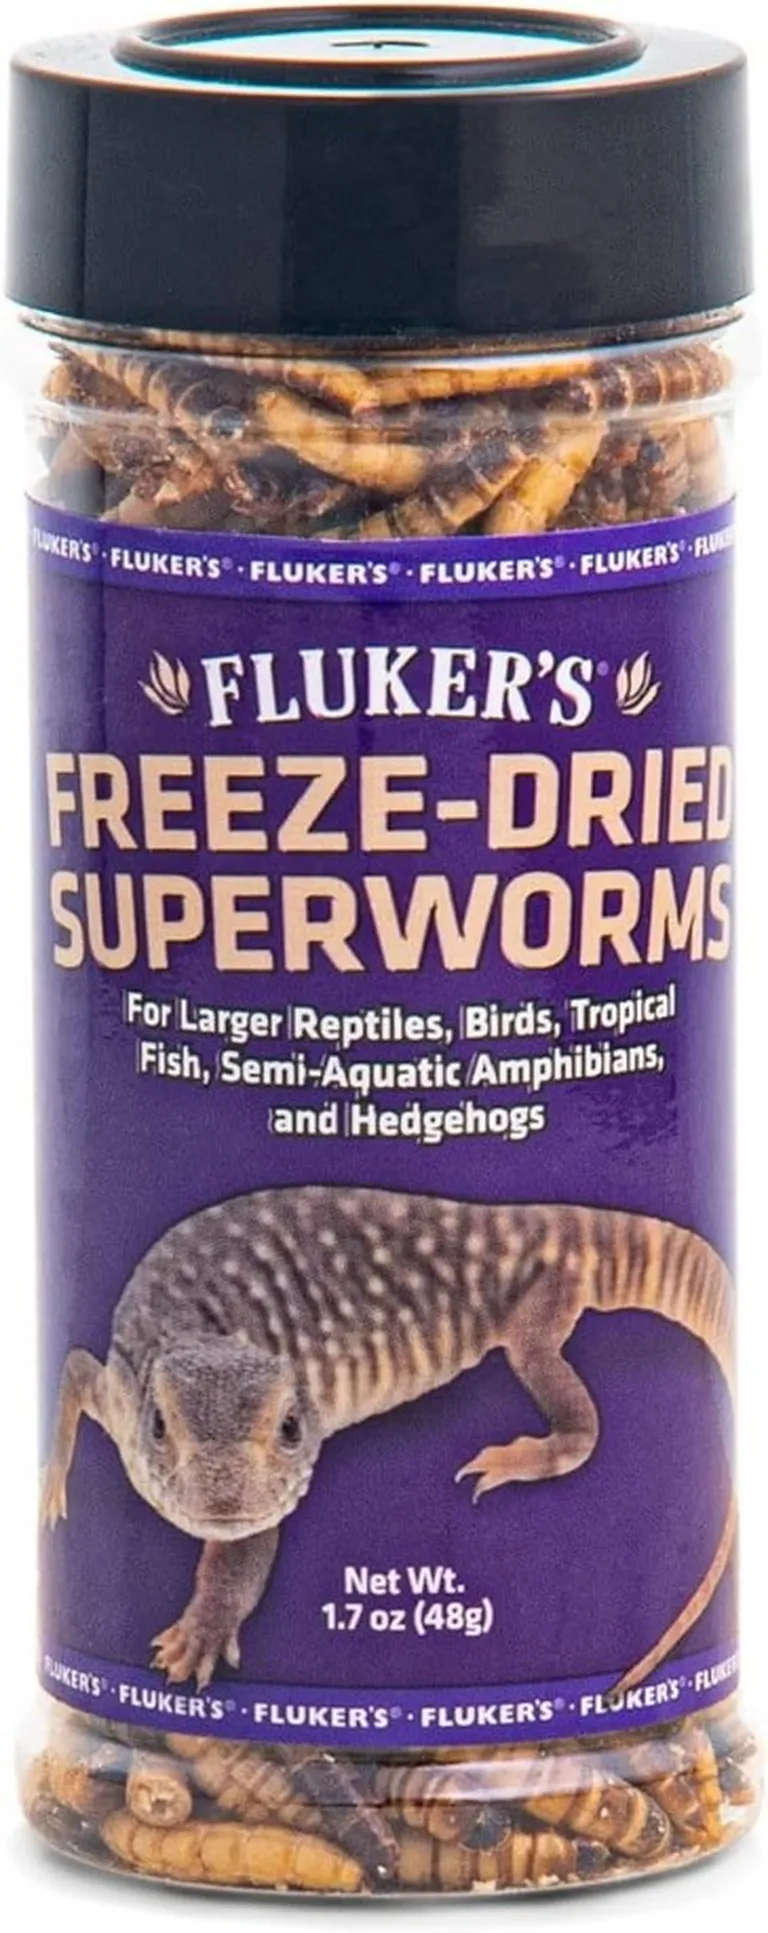 Flukers Freeze Dried Superworms for Reptiles Photo 2